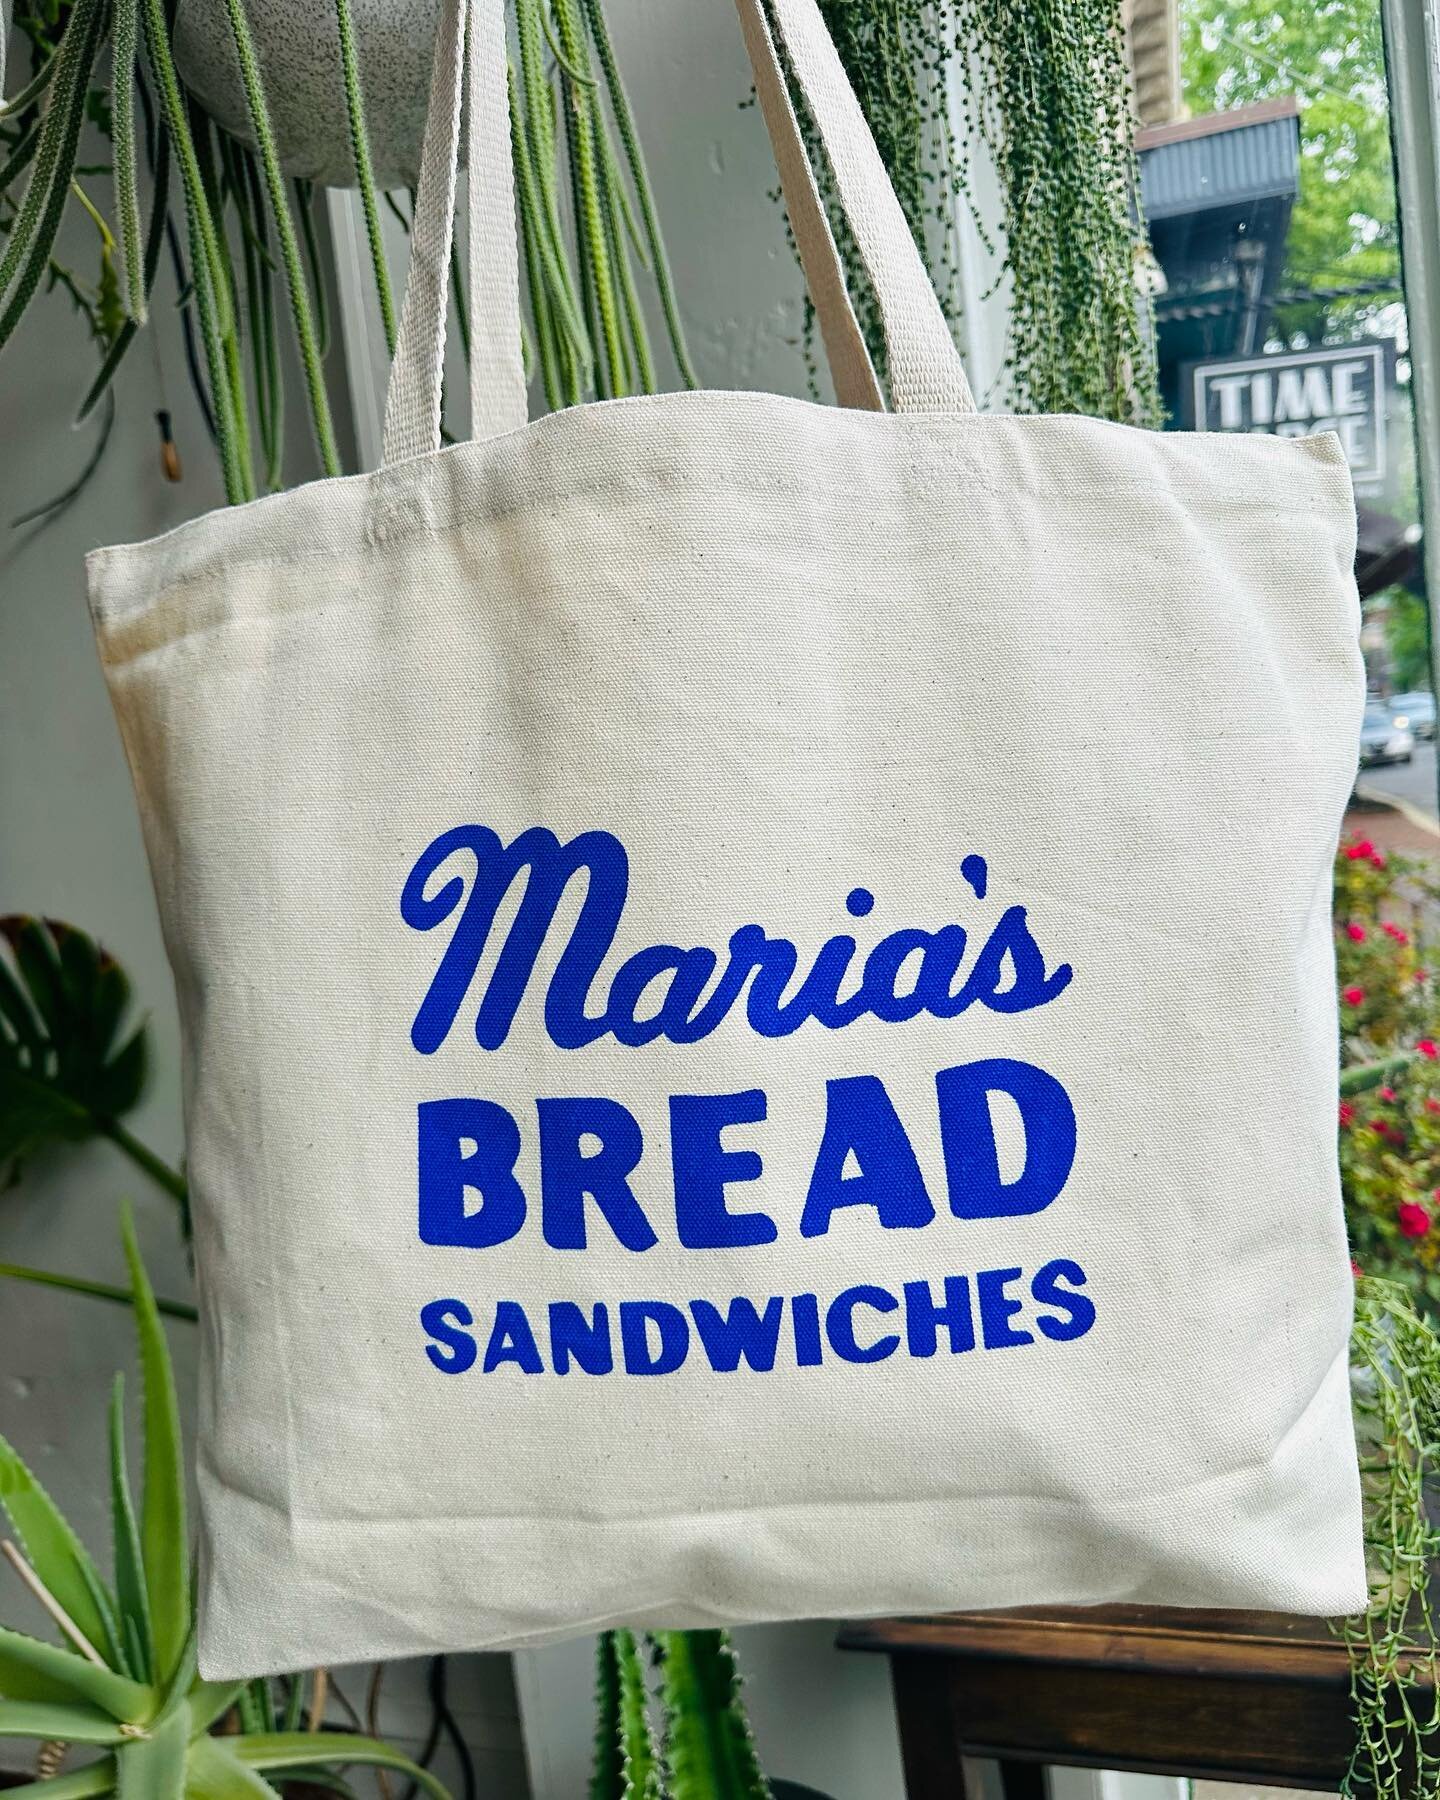 Happy First Farmers Market Day!!!

We&rsquo;ll be selling these Market Totes along with our breakfast sandwiches, buttermilk biscuits &amp; blueberry butter, homemade granola, NJ tomato soup, and our &ldquo;down the shore&rdquo; chicken salad to get 